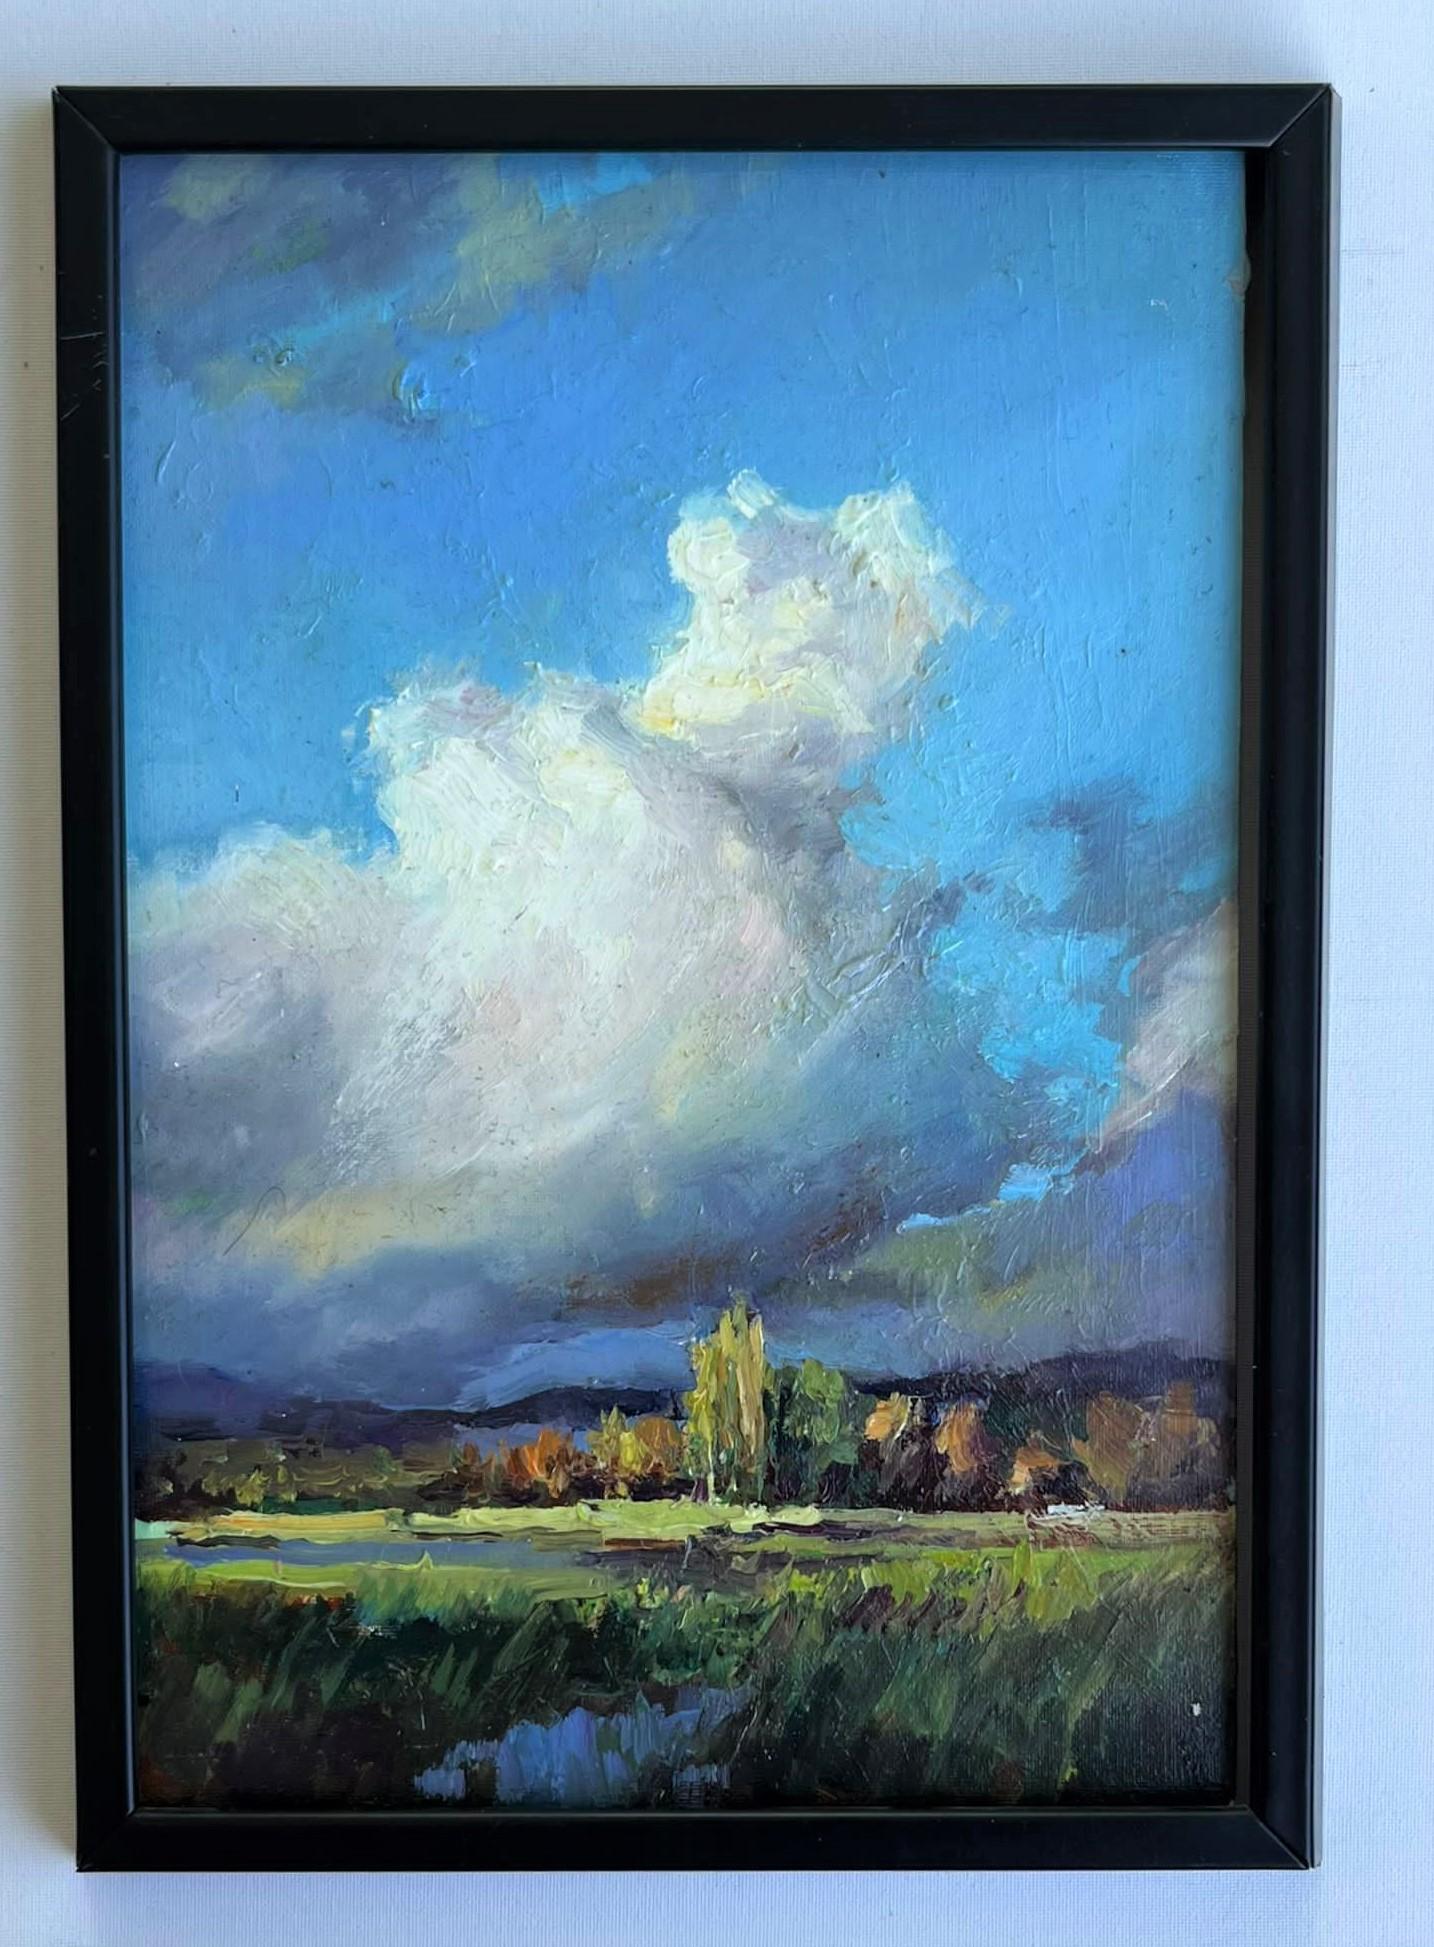 Max Skoblinsky  Landscape Painting - Through the Clouds: The Magic of Stories in the Heavenly Realm